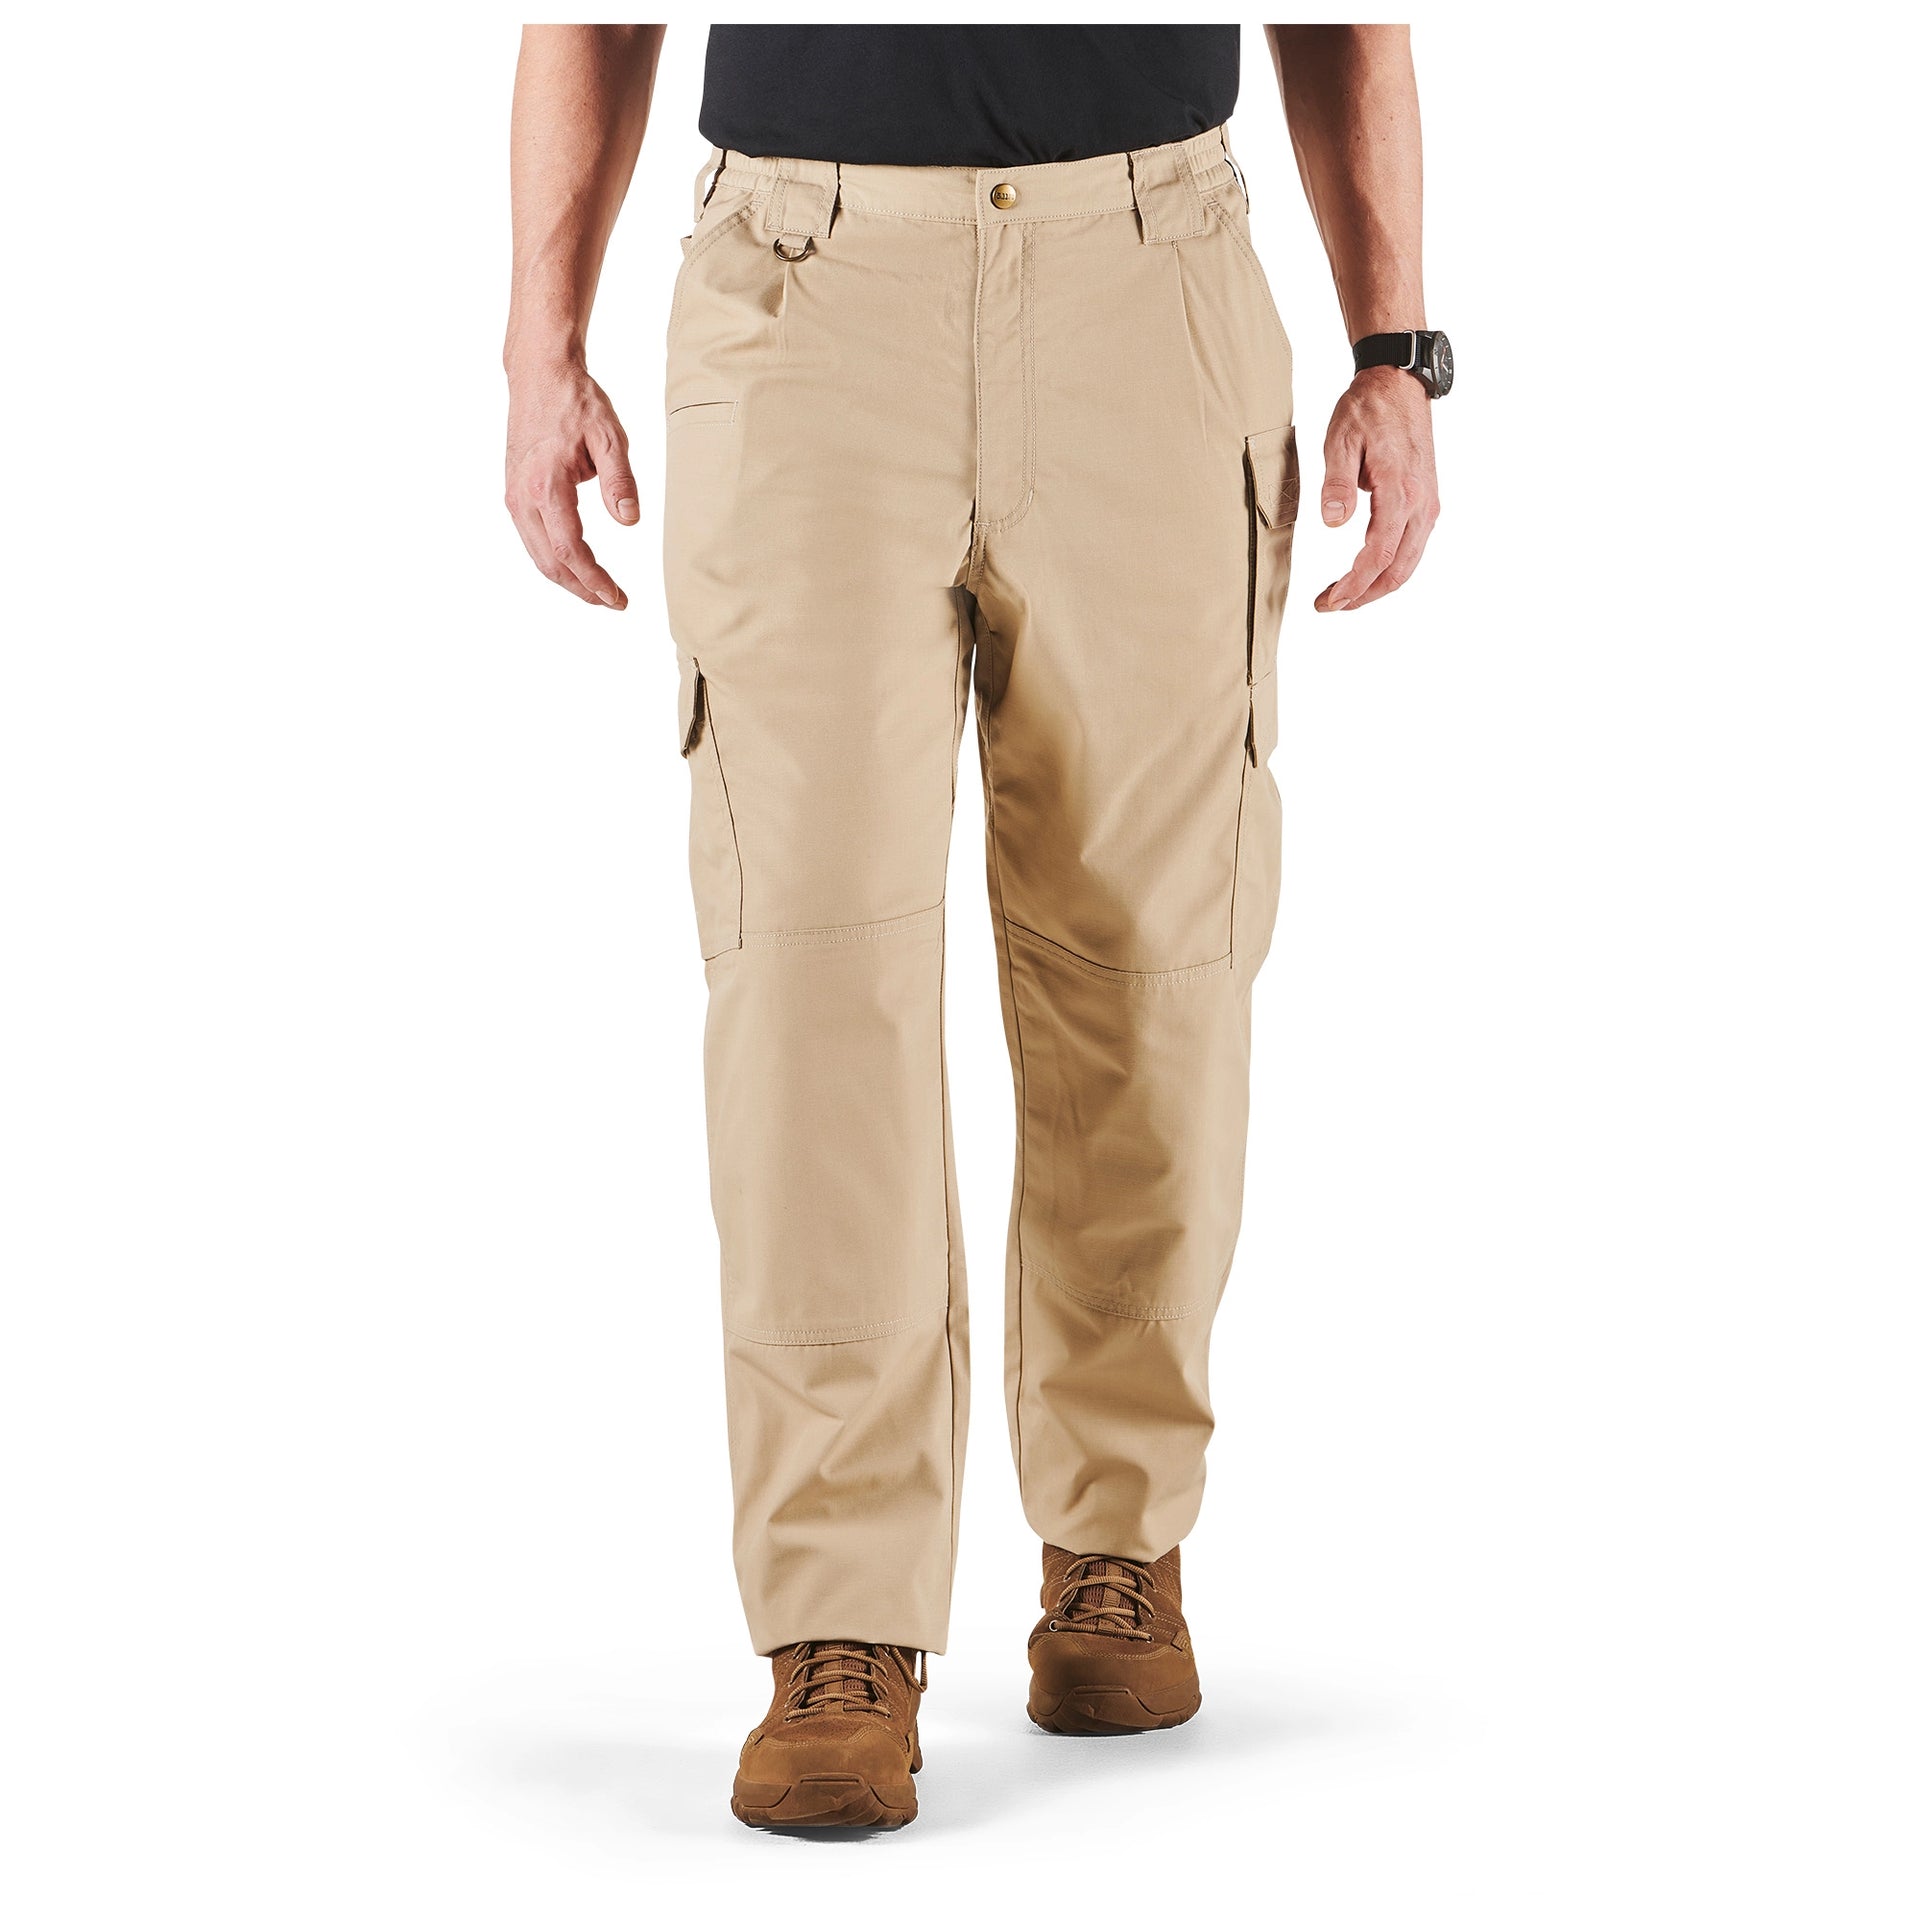 5.11 Tactical Taclite® Pro Ripstop Pant (74273) | The Fire Center | Fuego Fire Center |  The Taclite® Pro Pant features eight pockets, our durable ripstop fabric, and a Teflon™ finish for stain- and soil-resistance. Double reinforced at the seat and knees mean these pants won’t wear out, no matter how much sitting, hustling, and crawling through the brush you do.